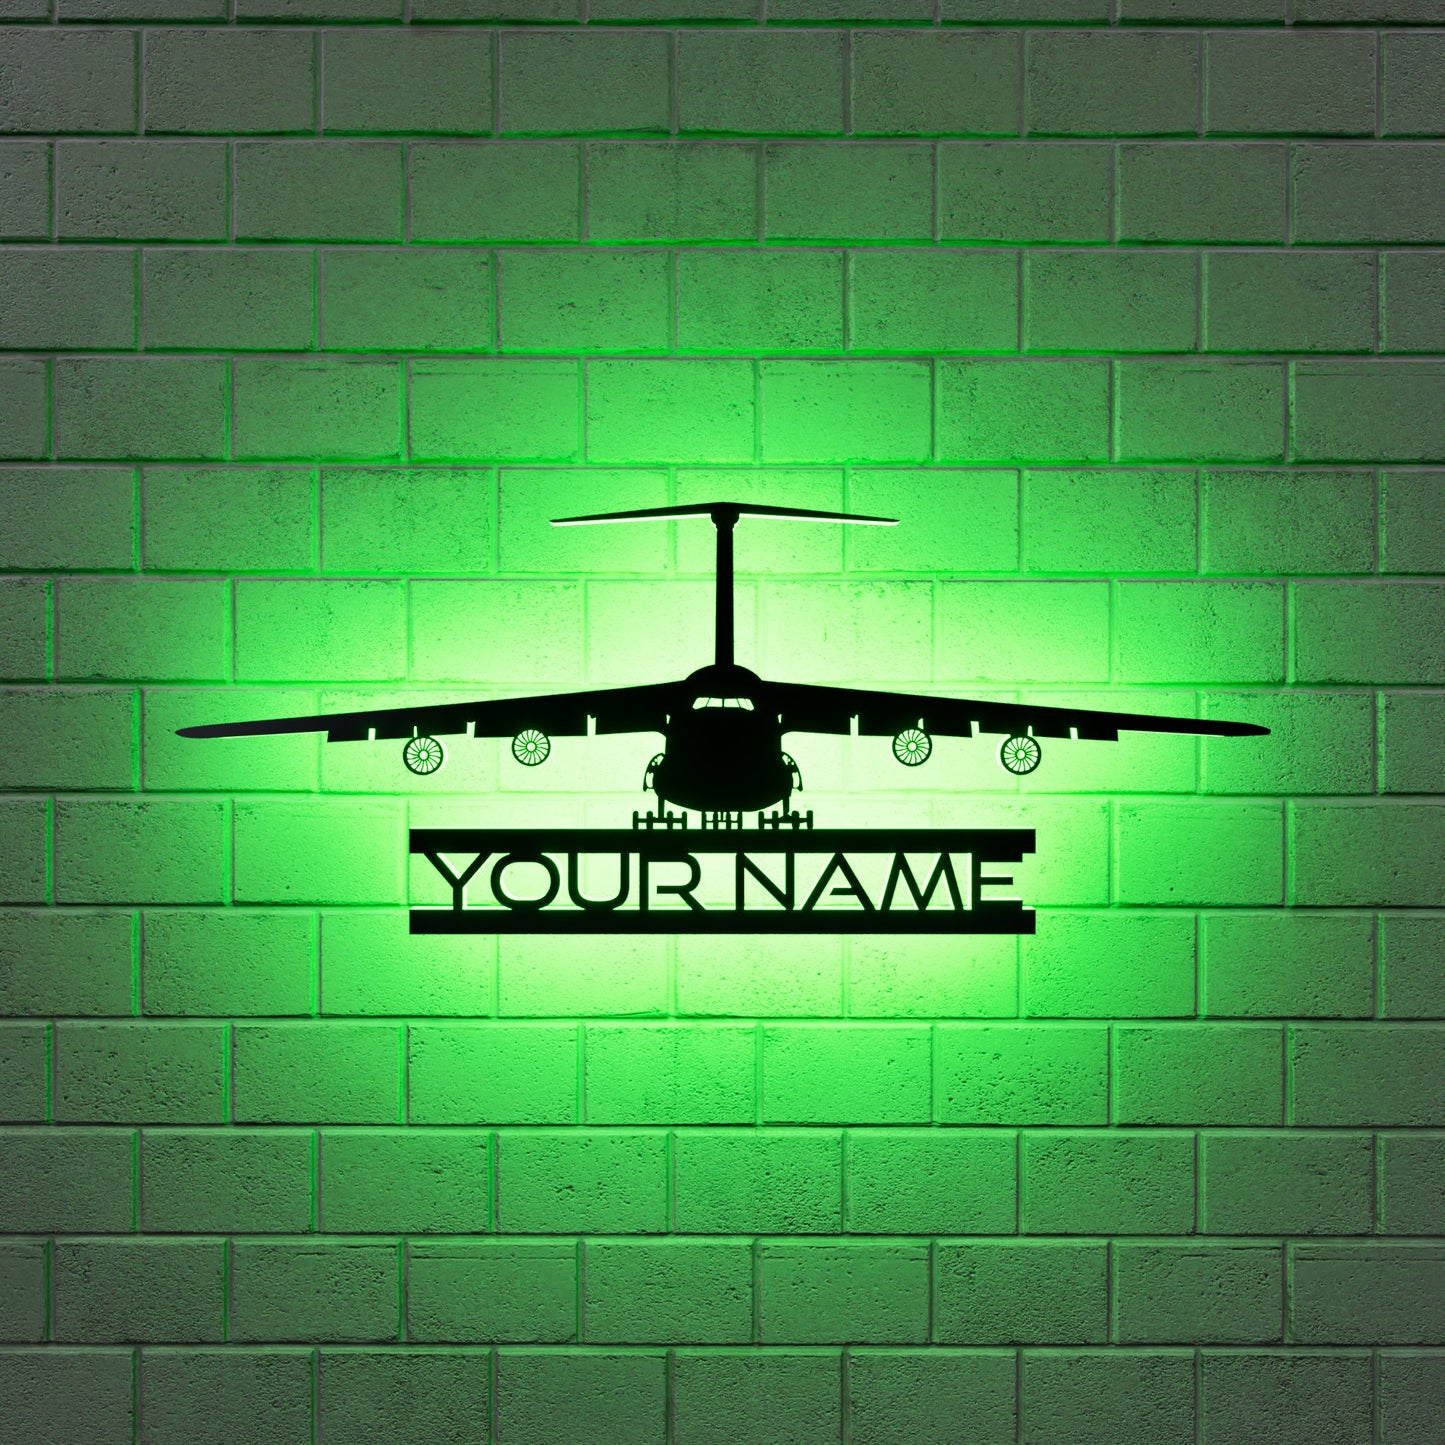 Cargo Aircraft RGB Led Wall Sign Personalized - Kutalp